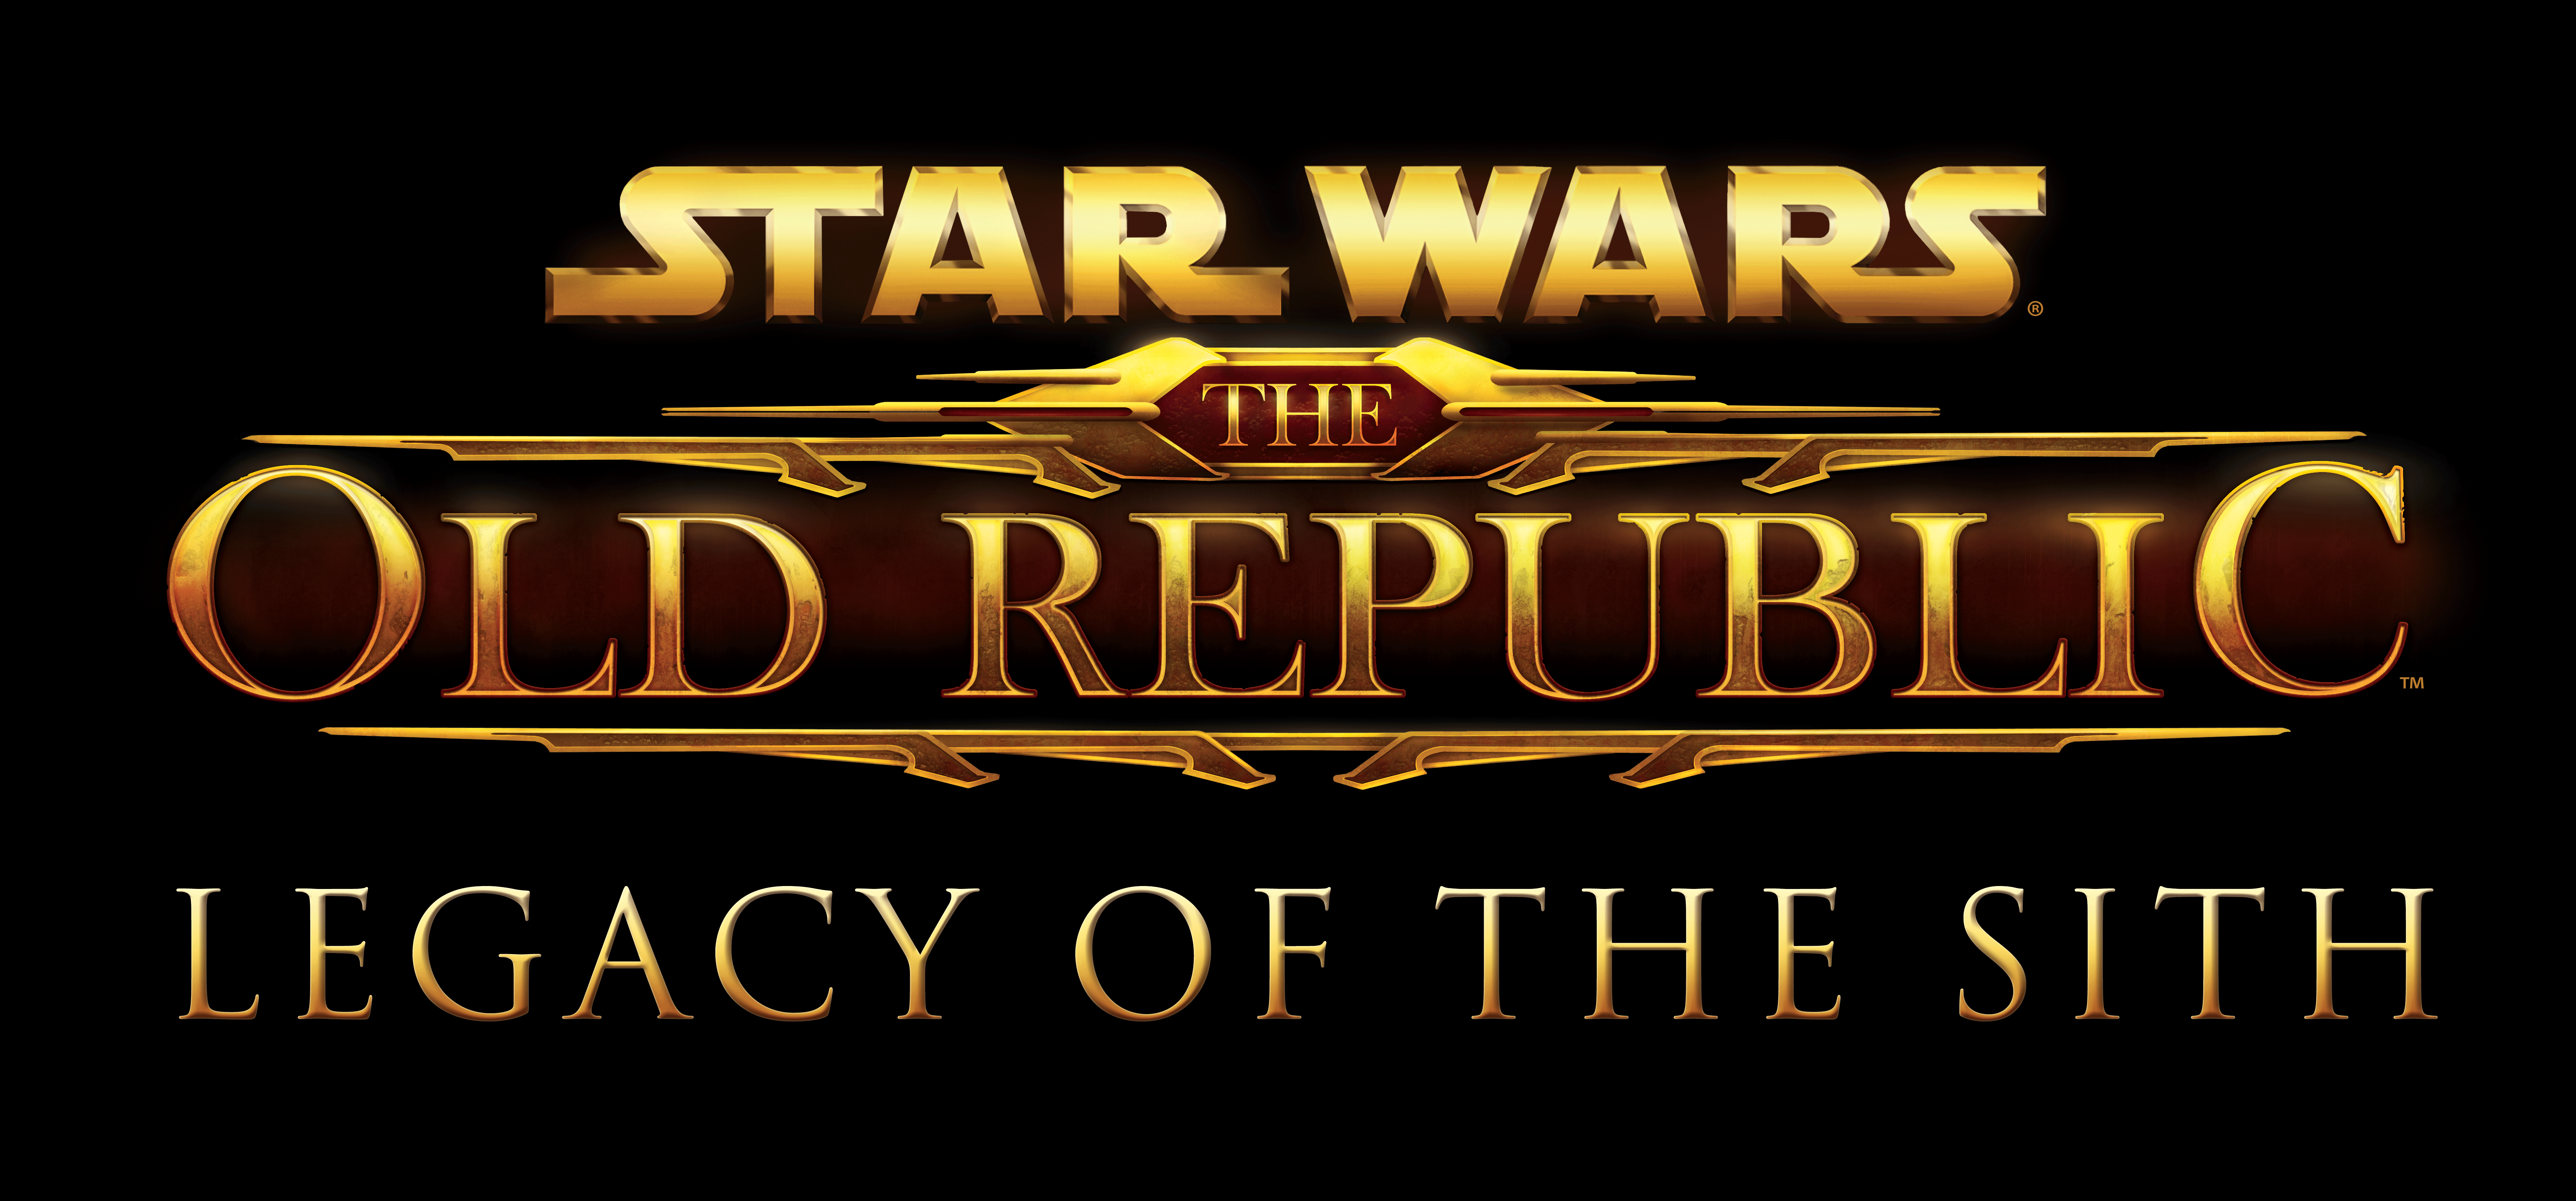 SWTOR_LOGO_Legacy_of_the_Sith.png